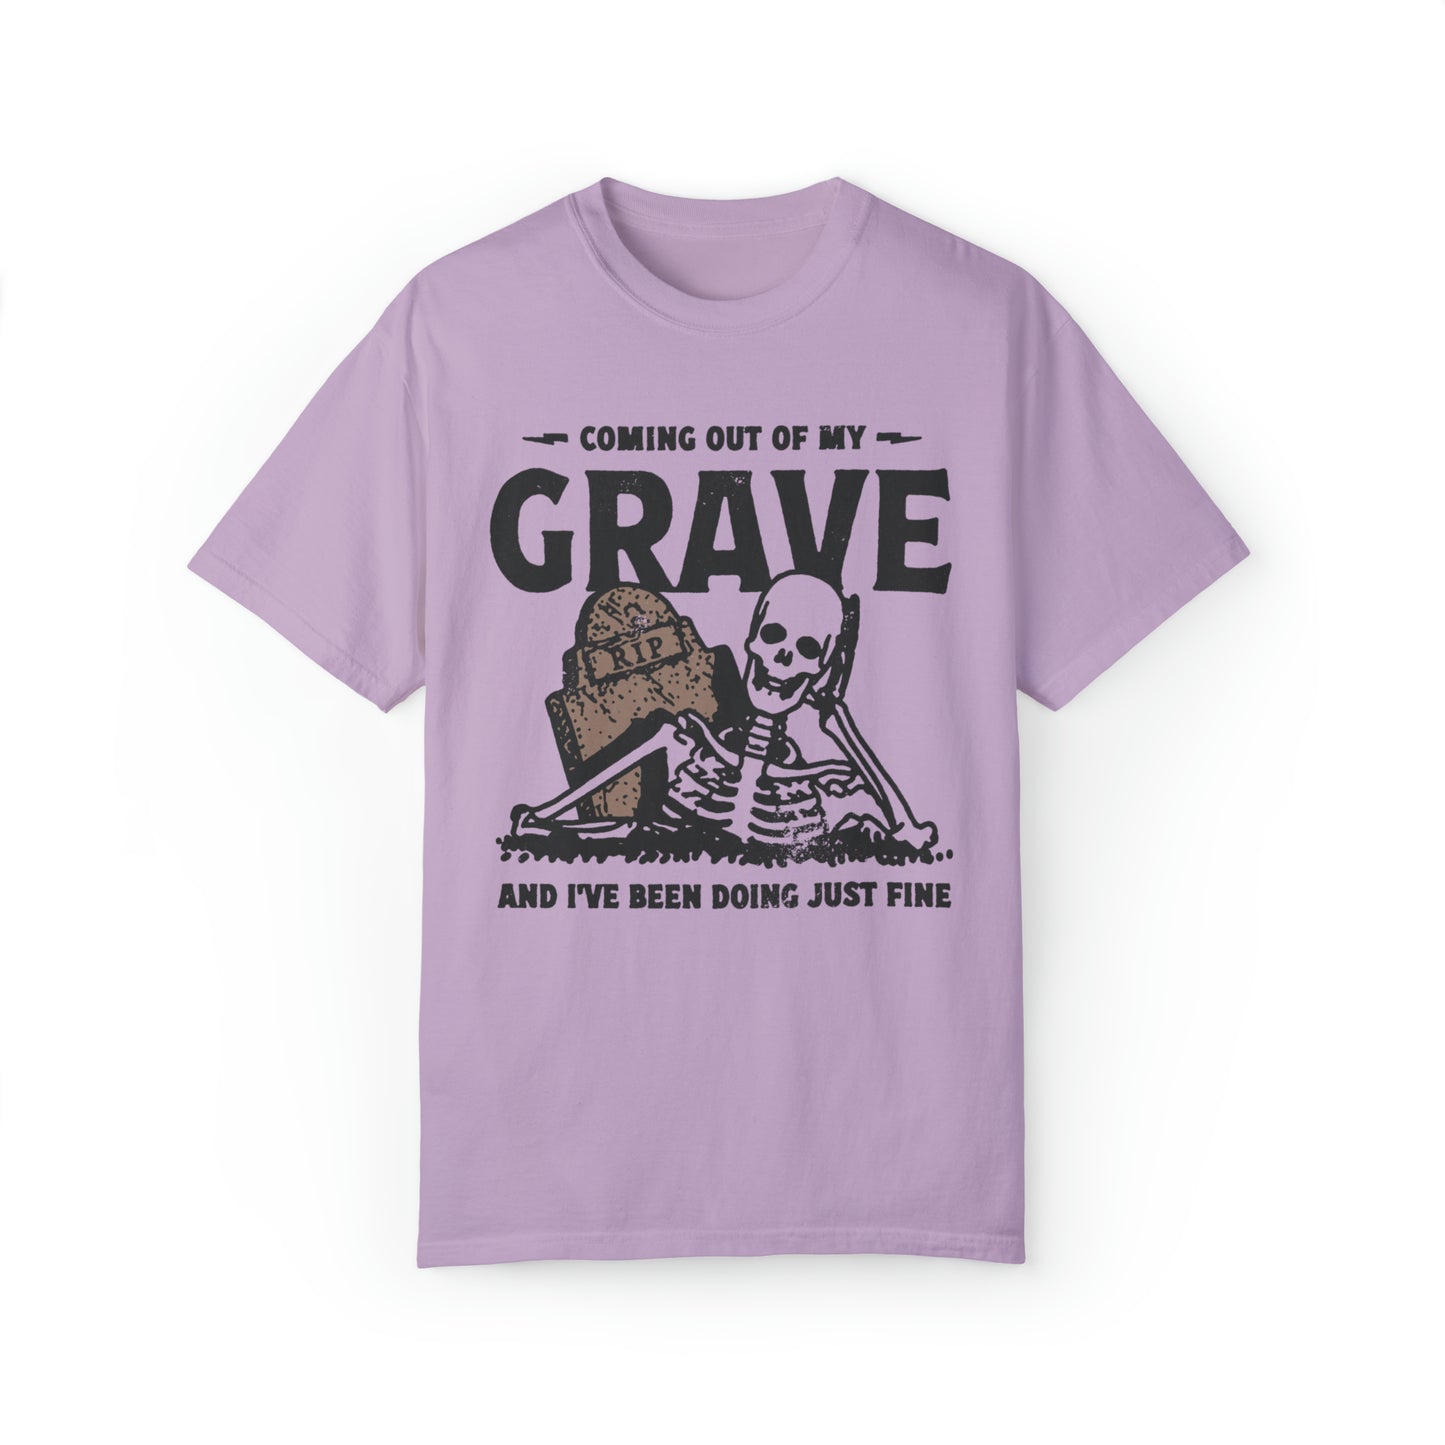 Coming Out Of My Grave Shirt